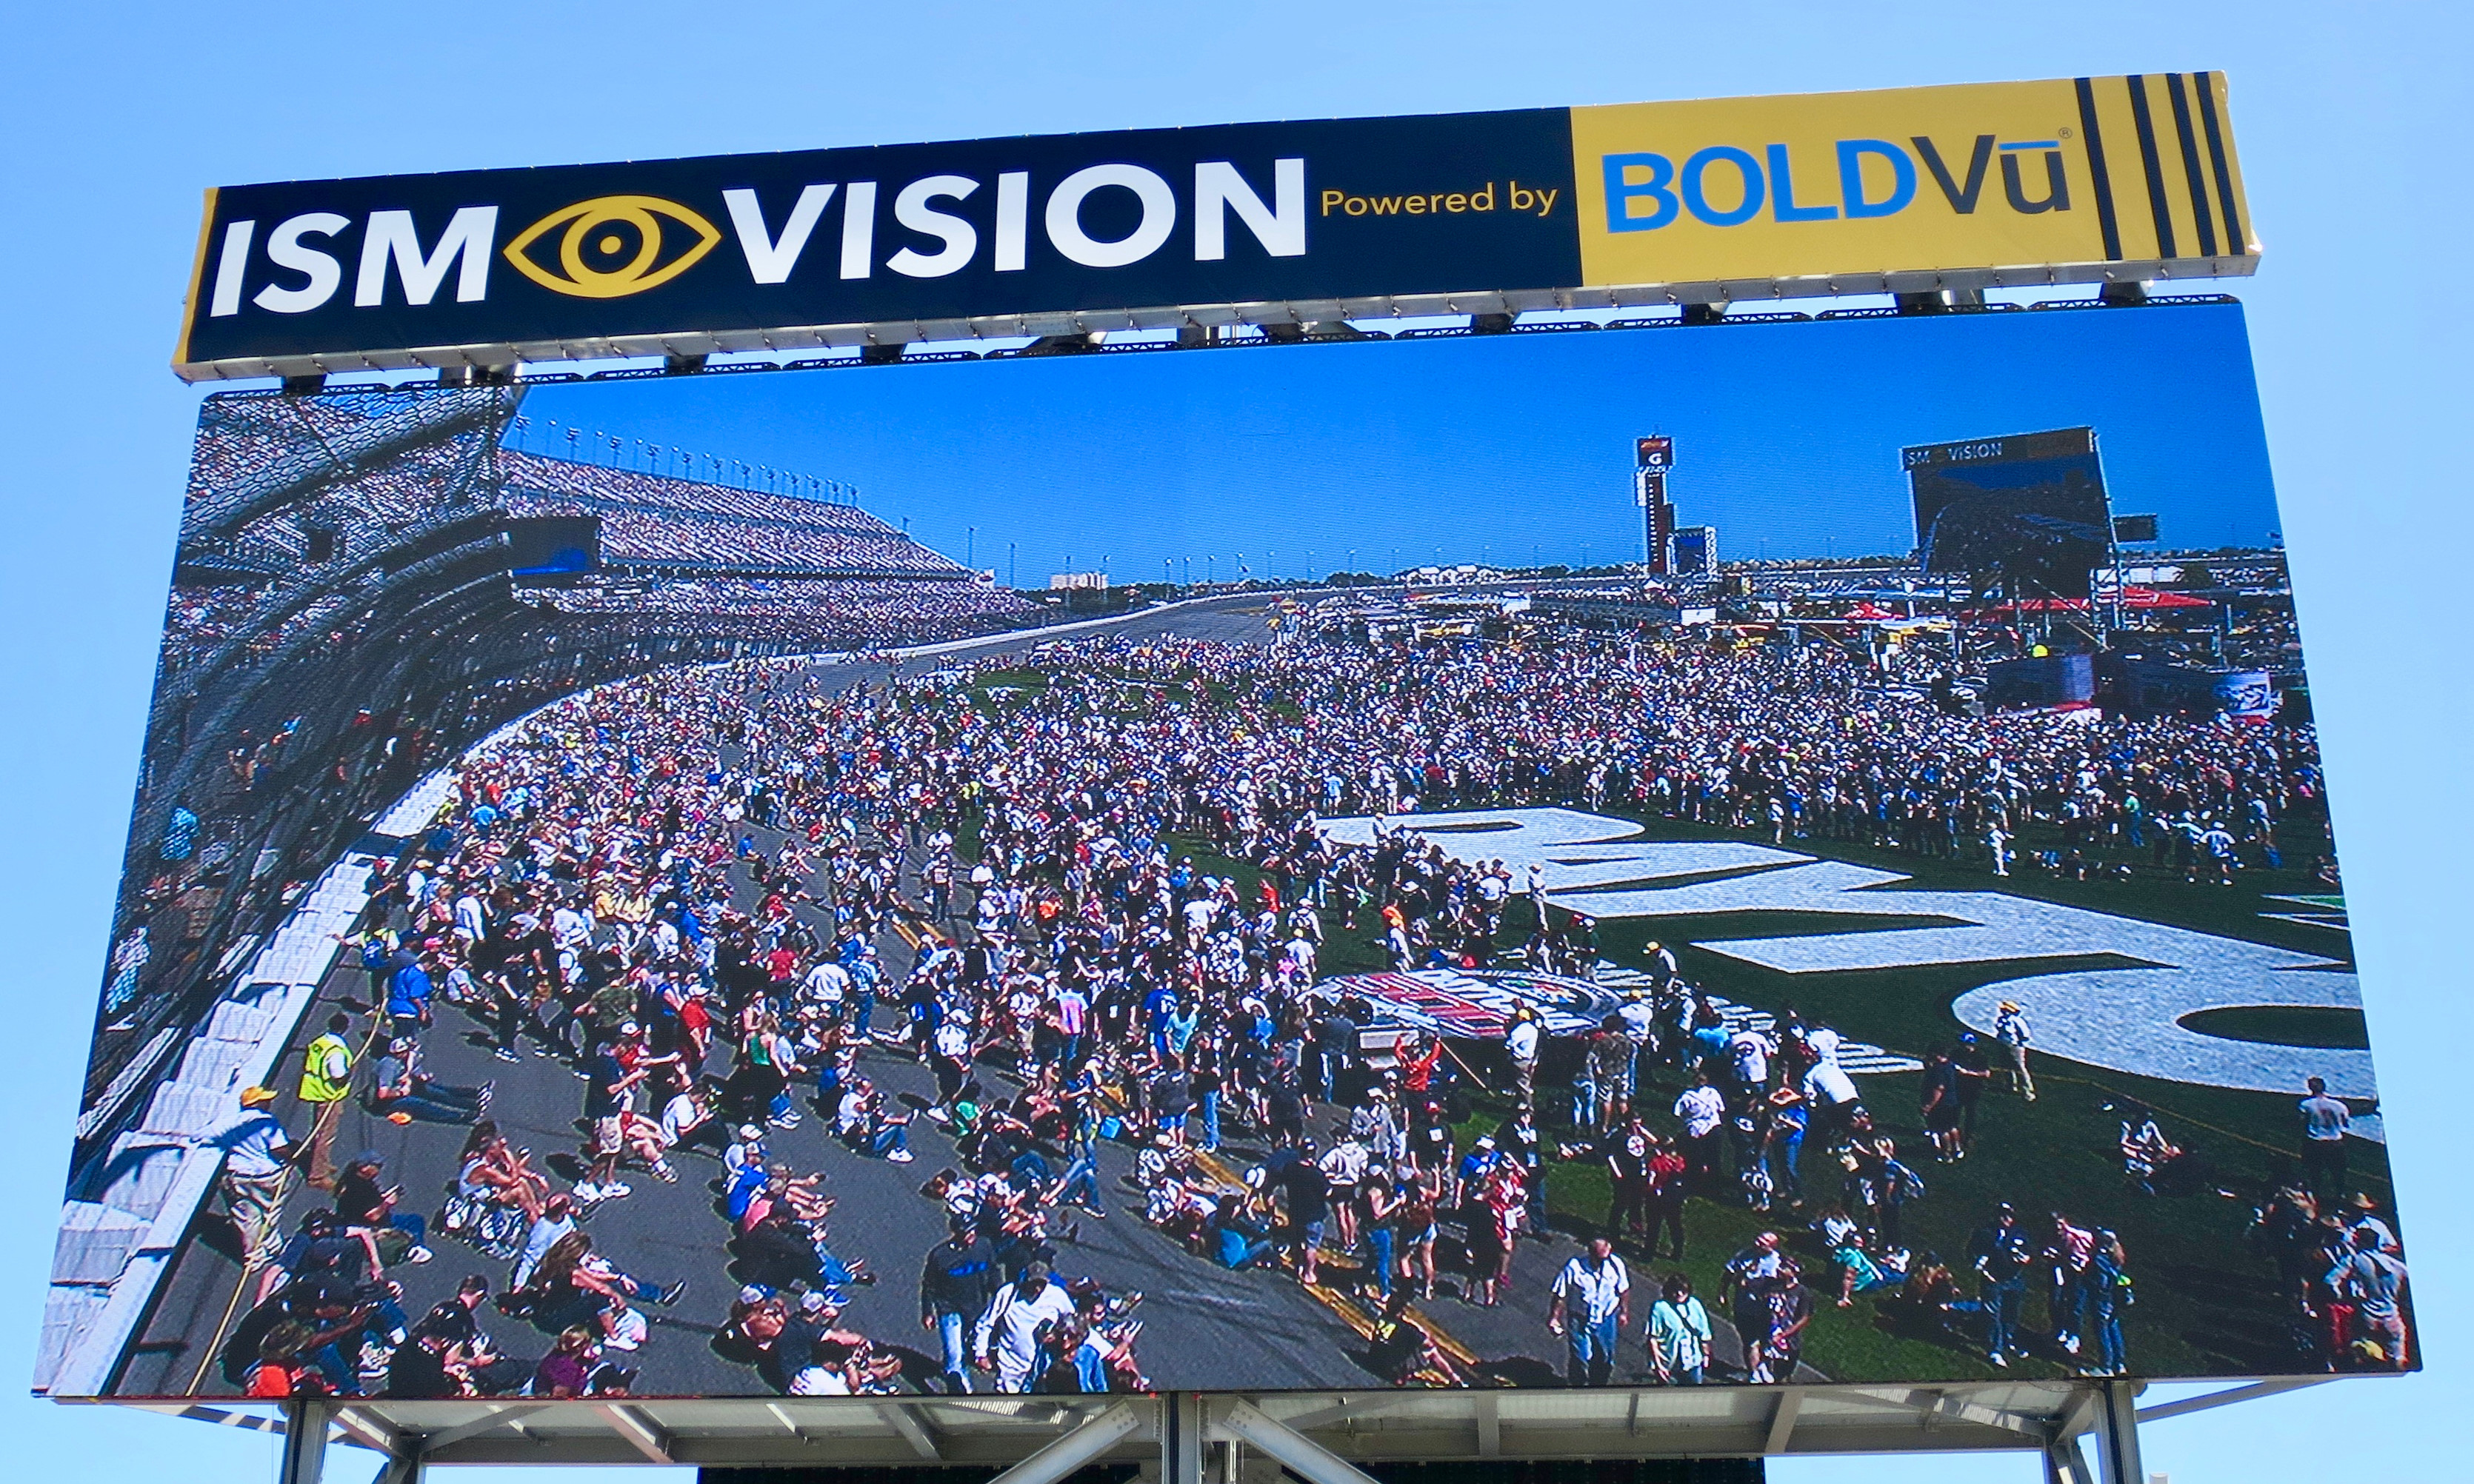 IMS Vision has replaced Sprint as the sponsor of NASCAR's in-venue video shows and the change has led to a cleaner look that also has new graphics created by SMT.